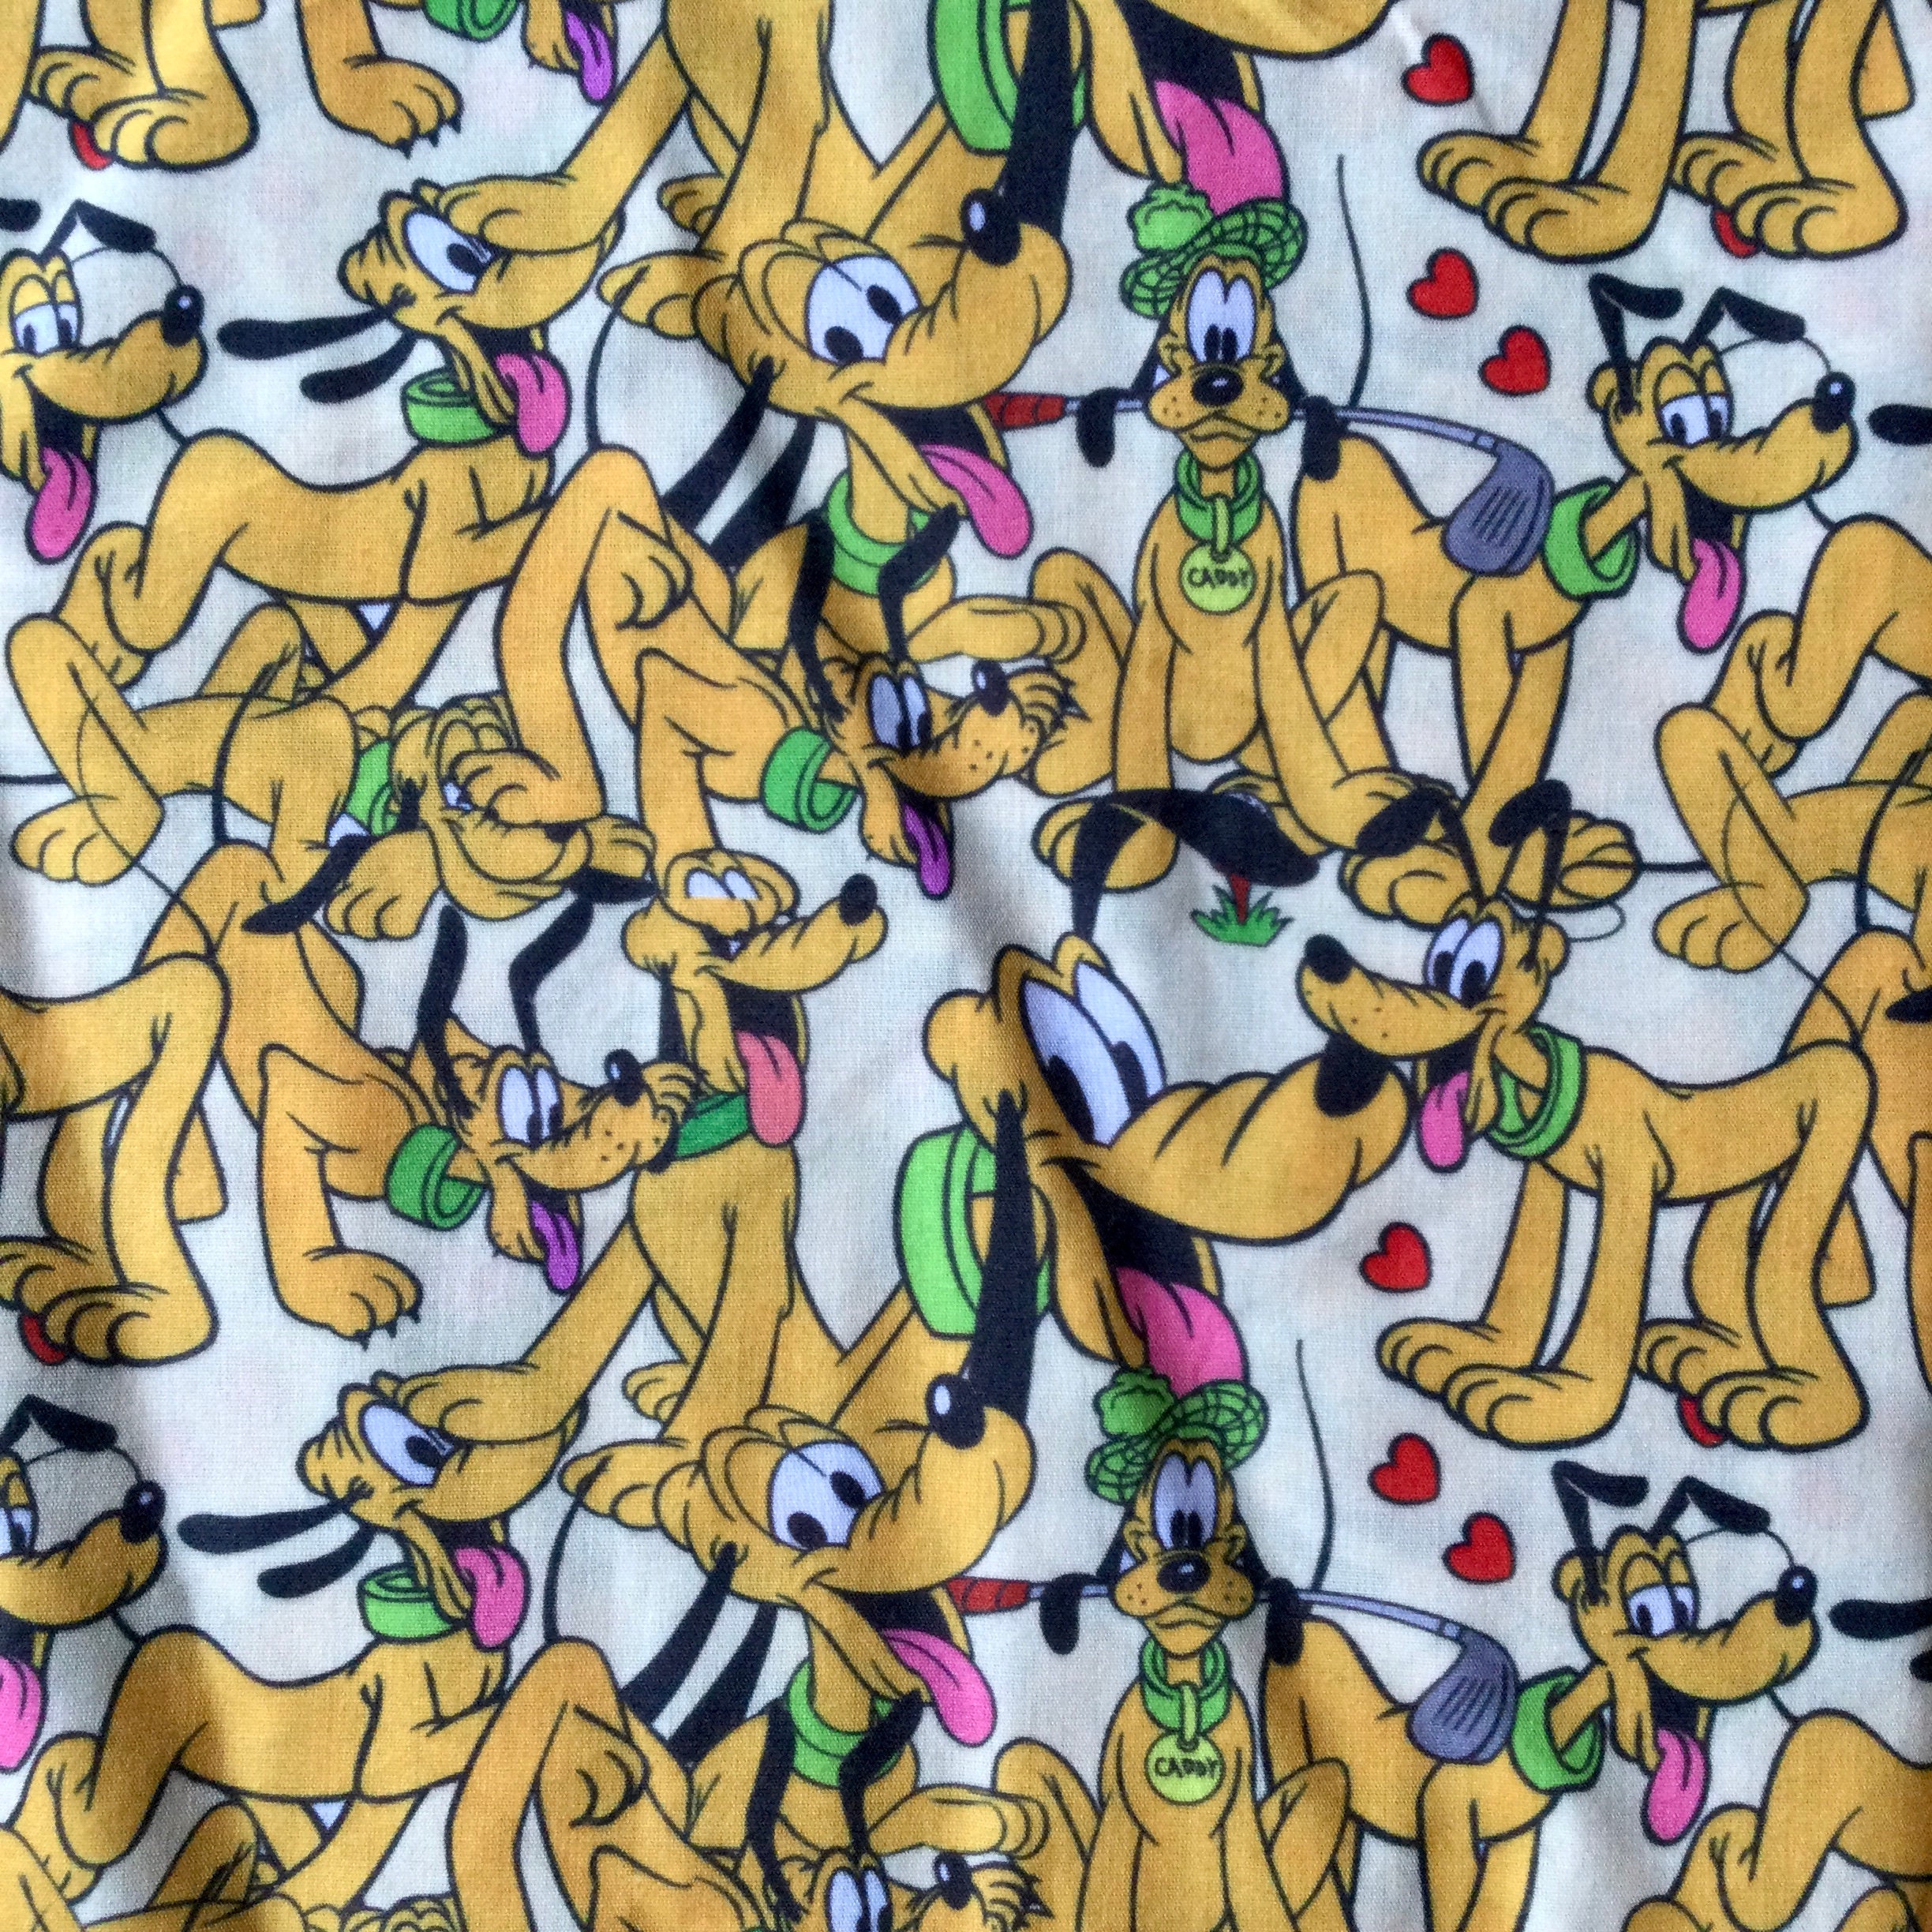 Disney Dogs Fabric 100% Cotton Fabric by the Yard Pluto Dalmatians Stitch  Doug Max and More Collage